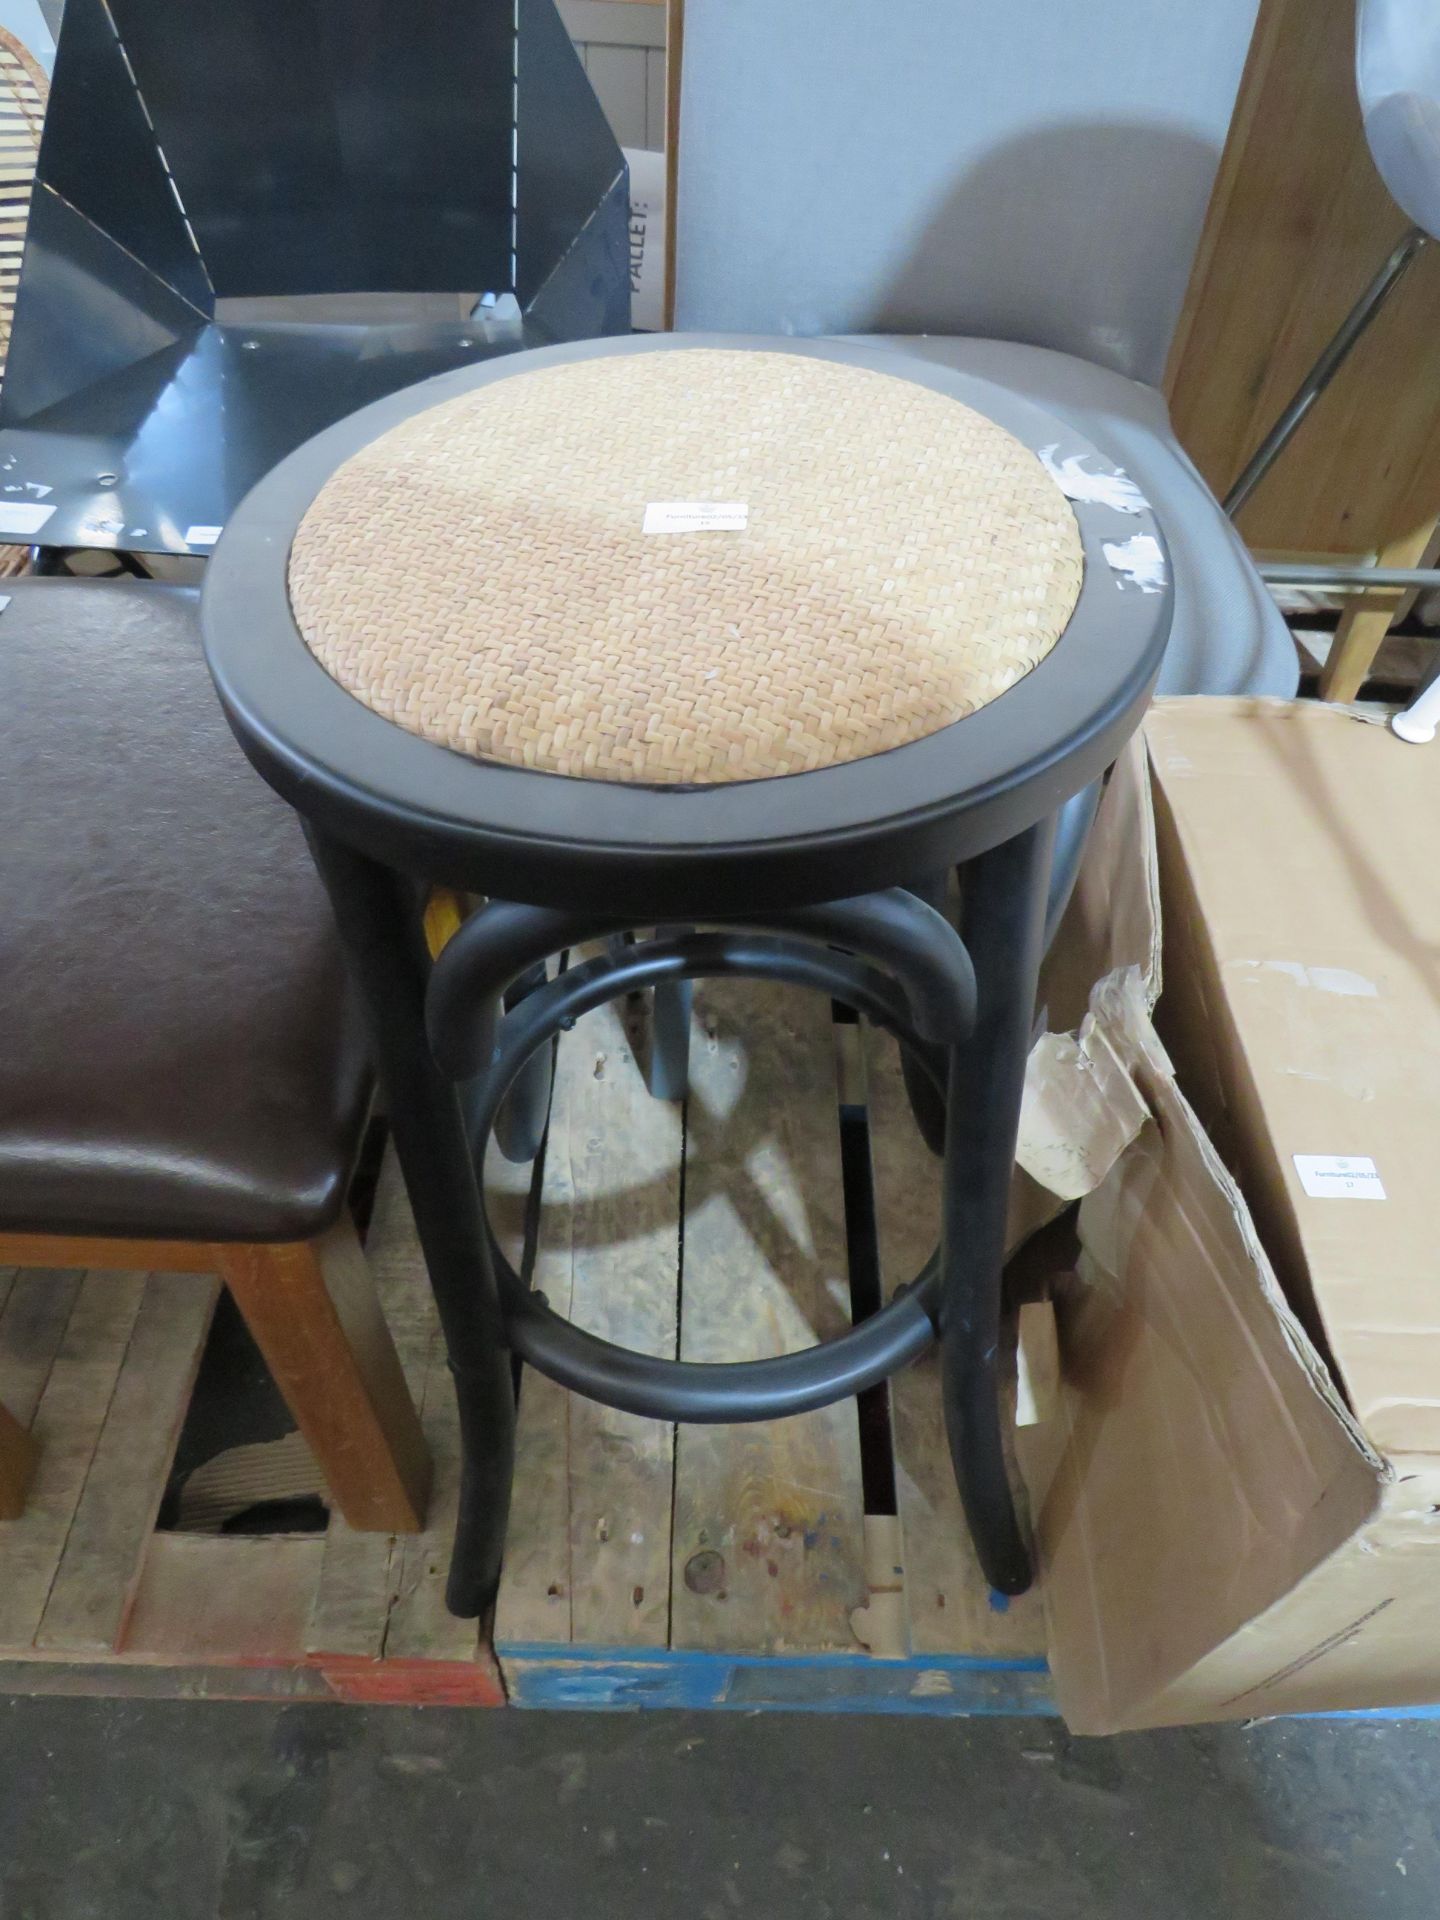 Cox & Cox Corso Natural Rattan Stool RRP 199 This item looks to be in good condition and appears